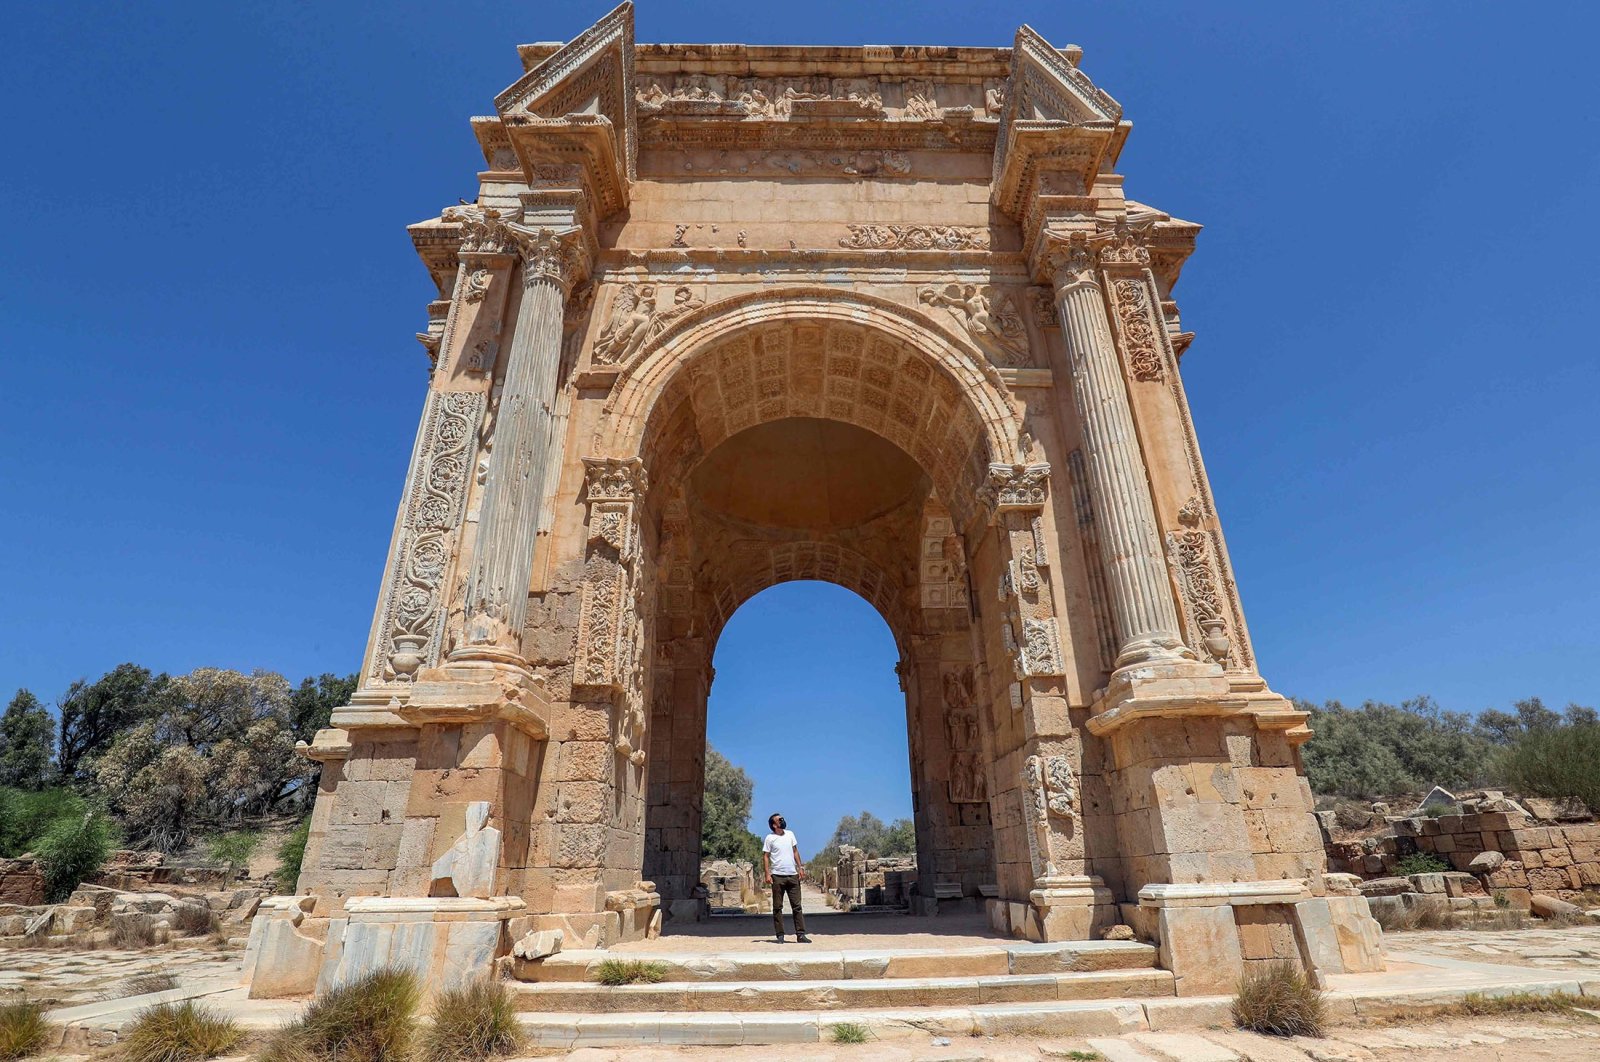 A man looks at the Arch of Septimus Severus in the ancient Roman city of Leptis Magna near the coastal city of al-Khums, Libya, Aug. 24, 2021. (AFP Photo)